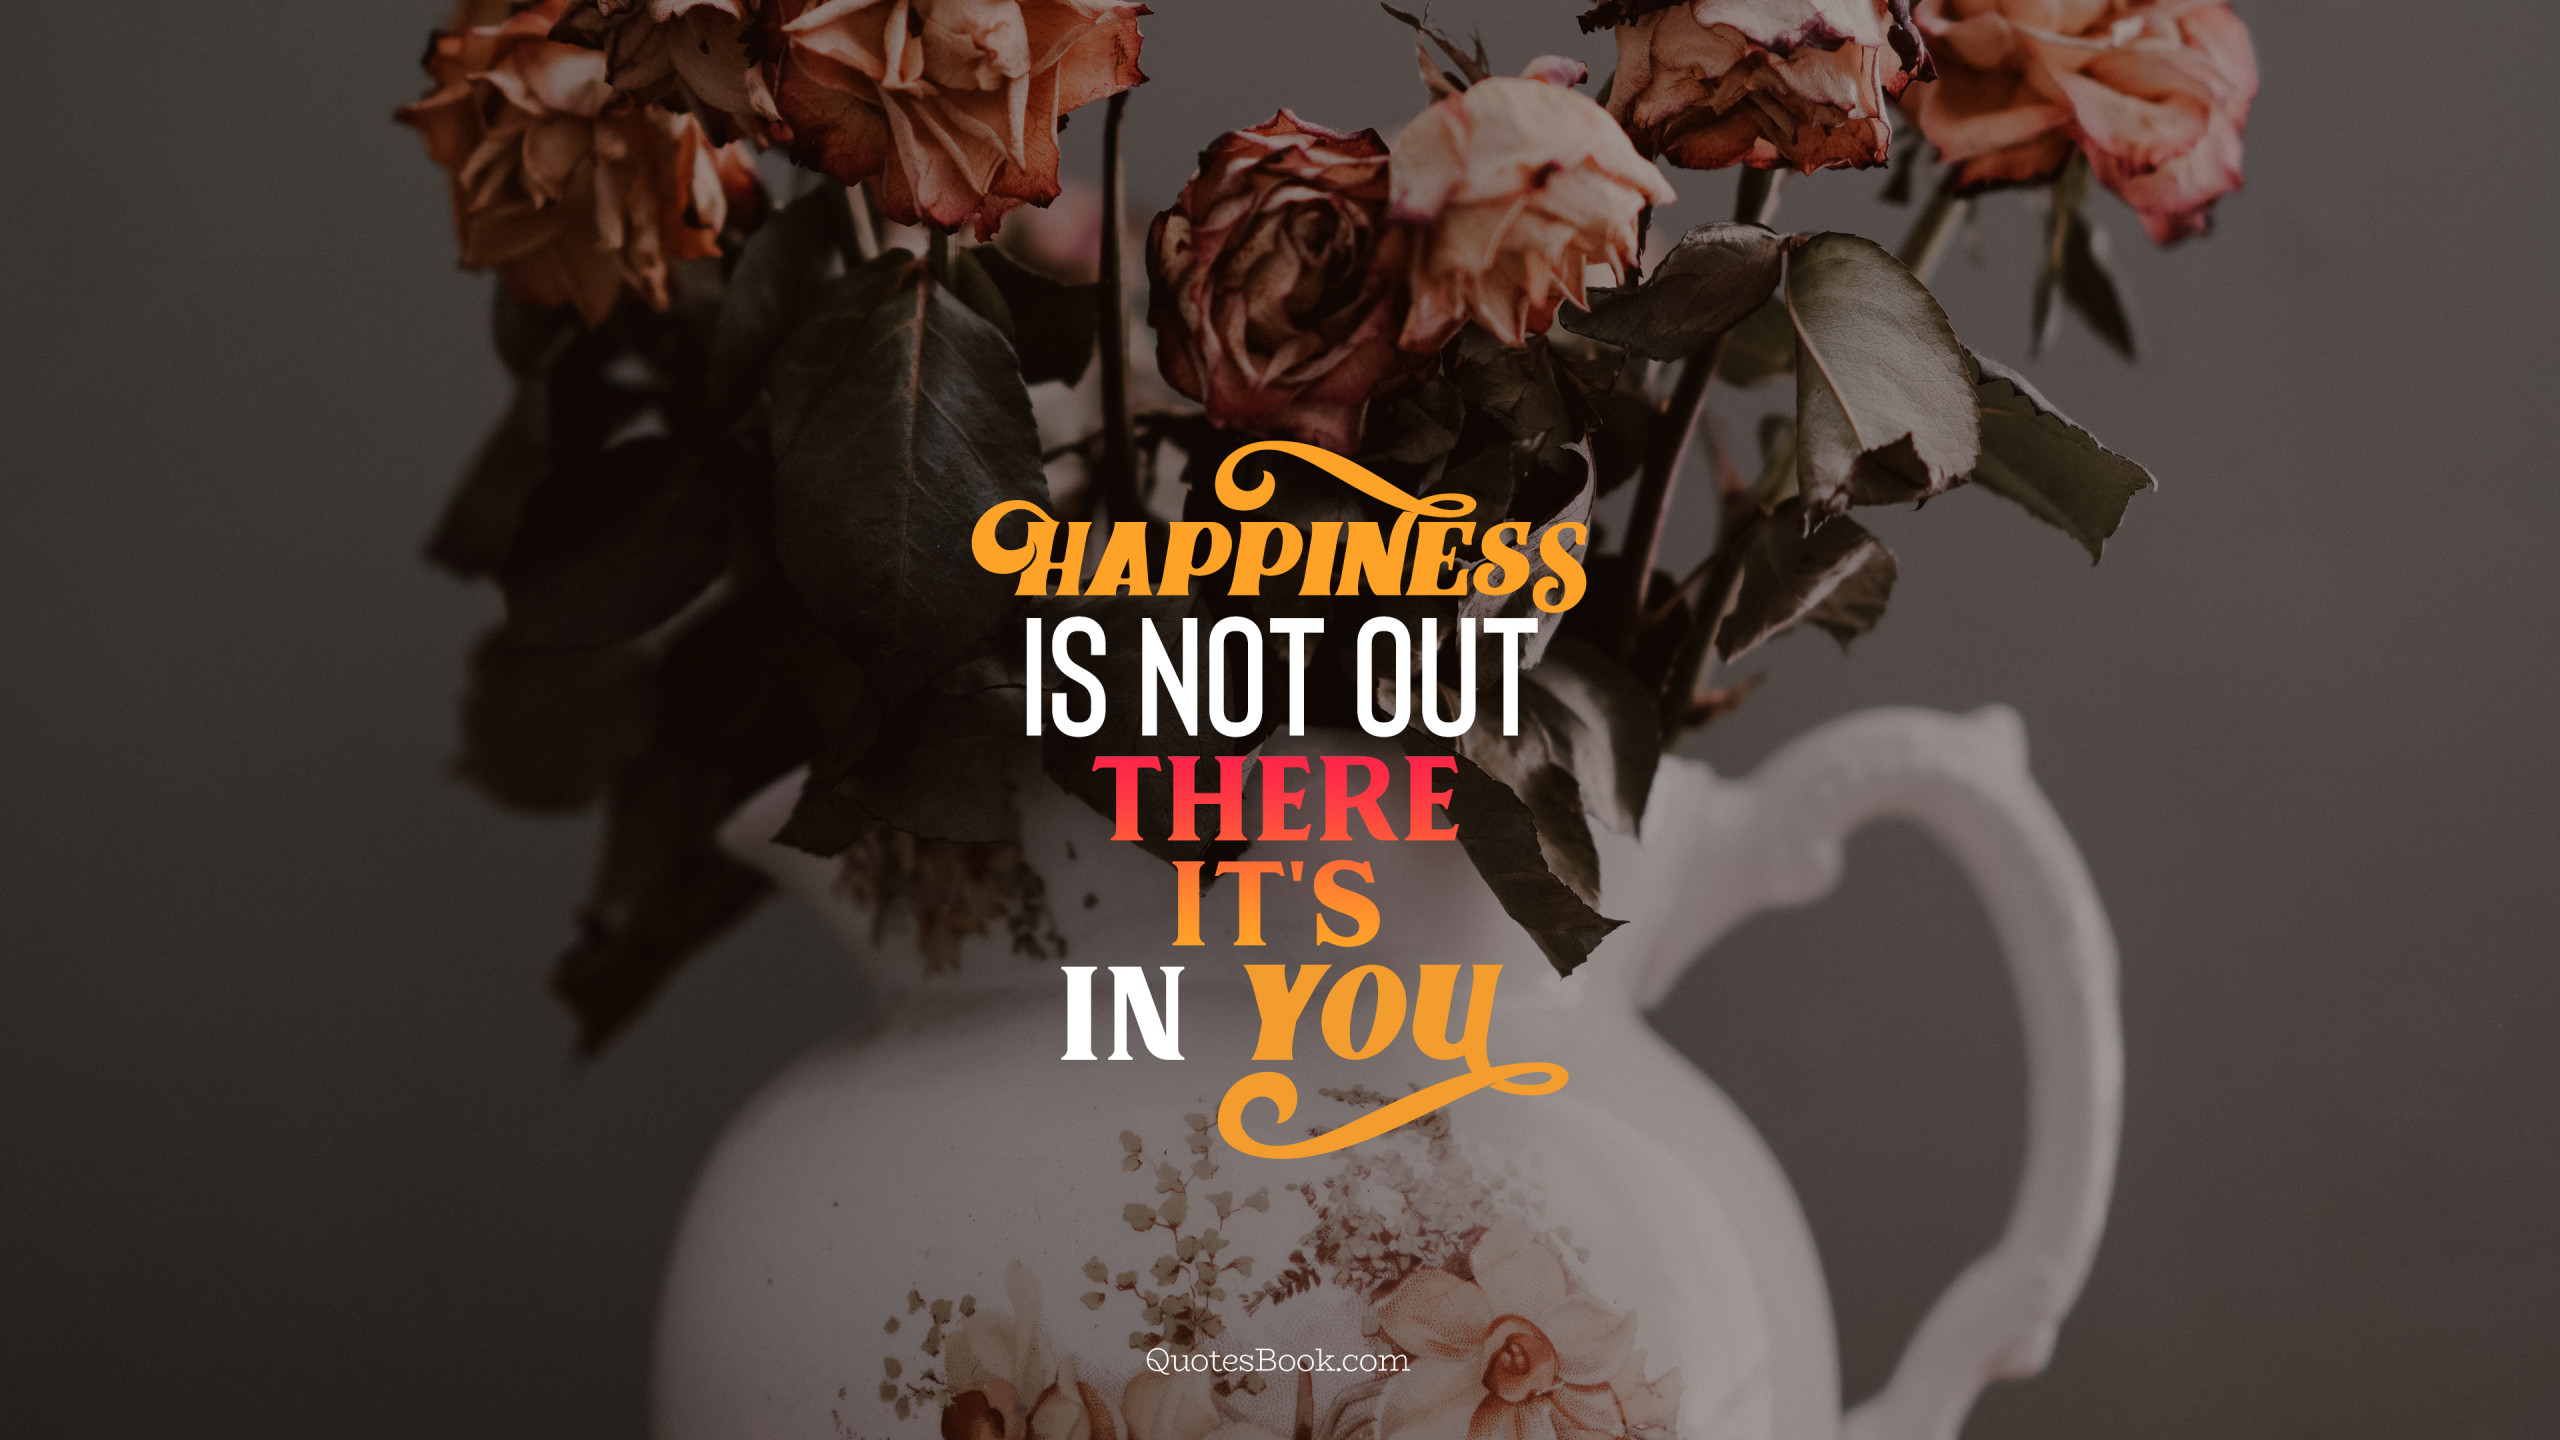 https://quotesbook.com/quotes/happiness-quotes/unknown-authors/happiness-is-not-out-there-its-in-you-2560x1440-1856.jpg